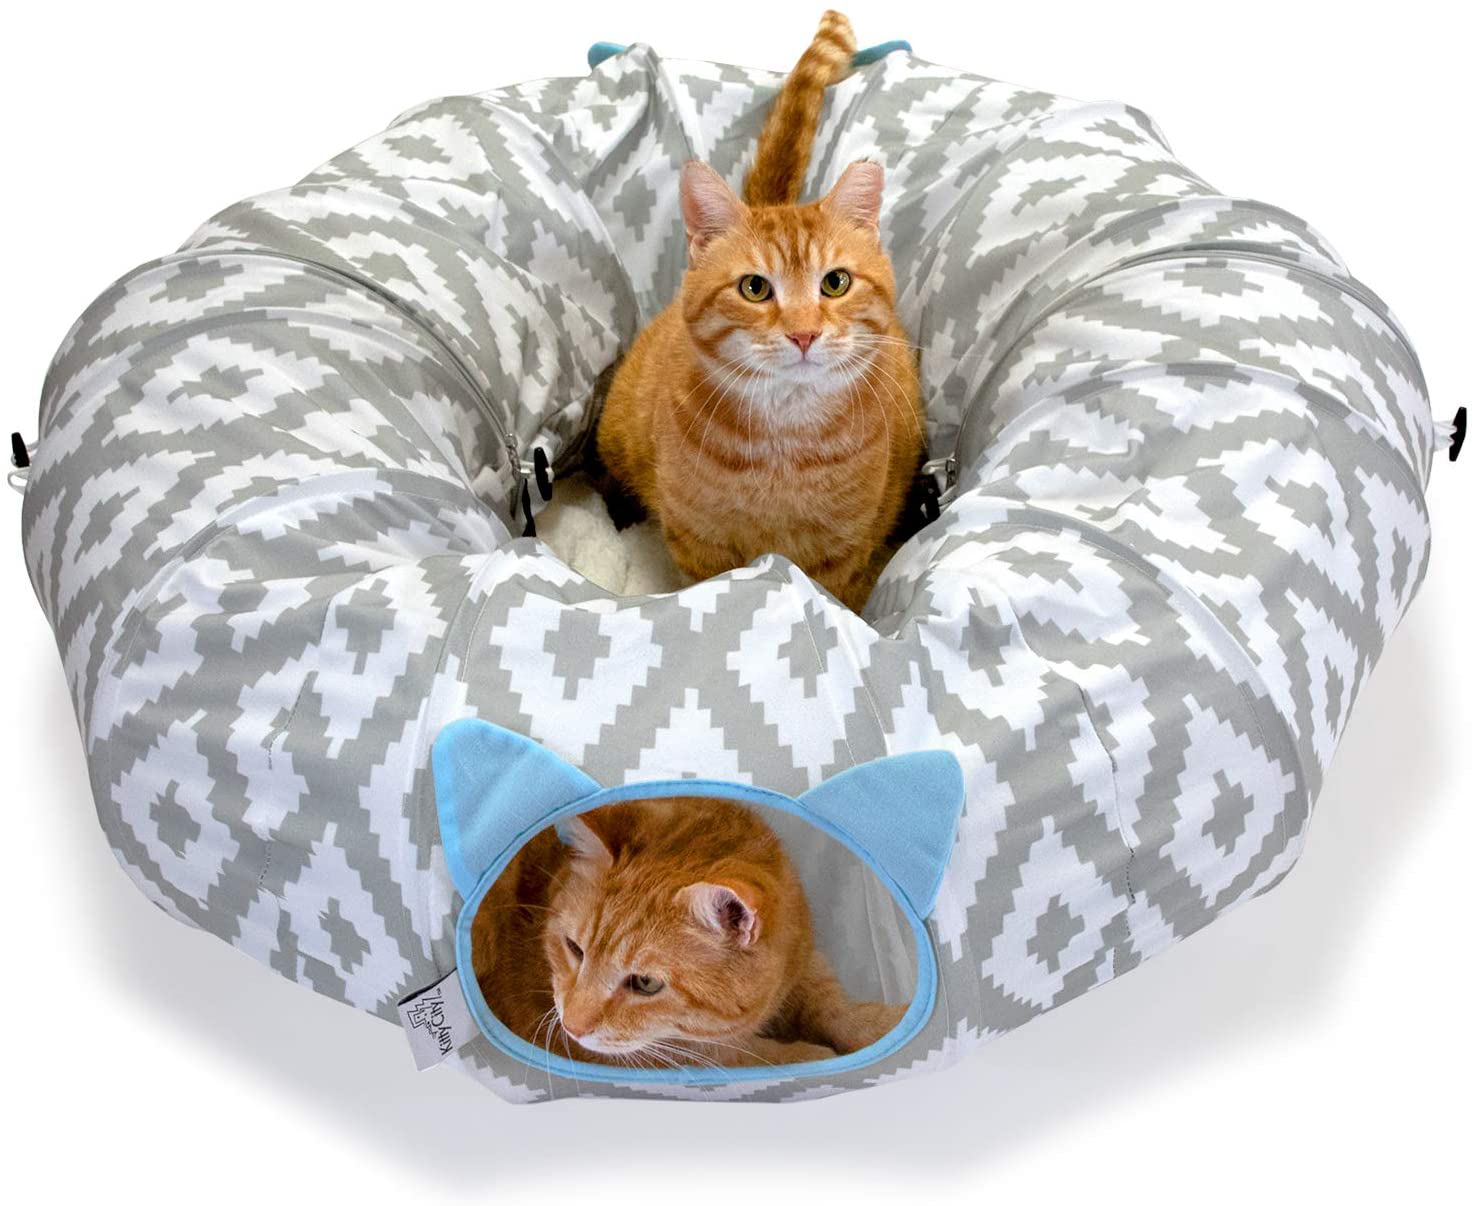 Kitty City Large Cat Tunnel Bed, Cat Bed, Pop up Bed, Cat Toys